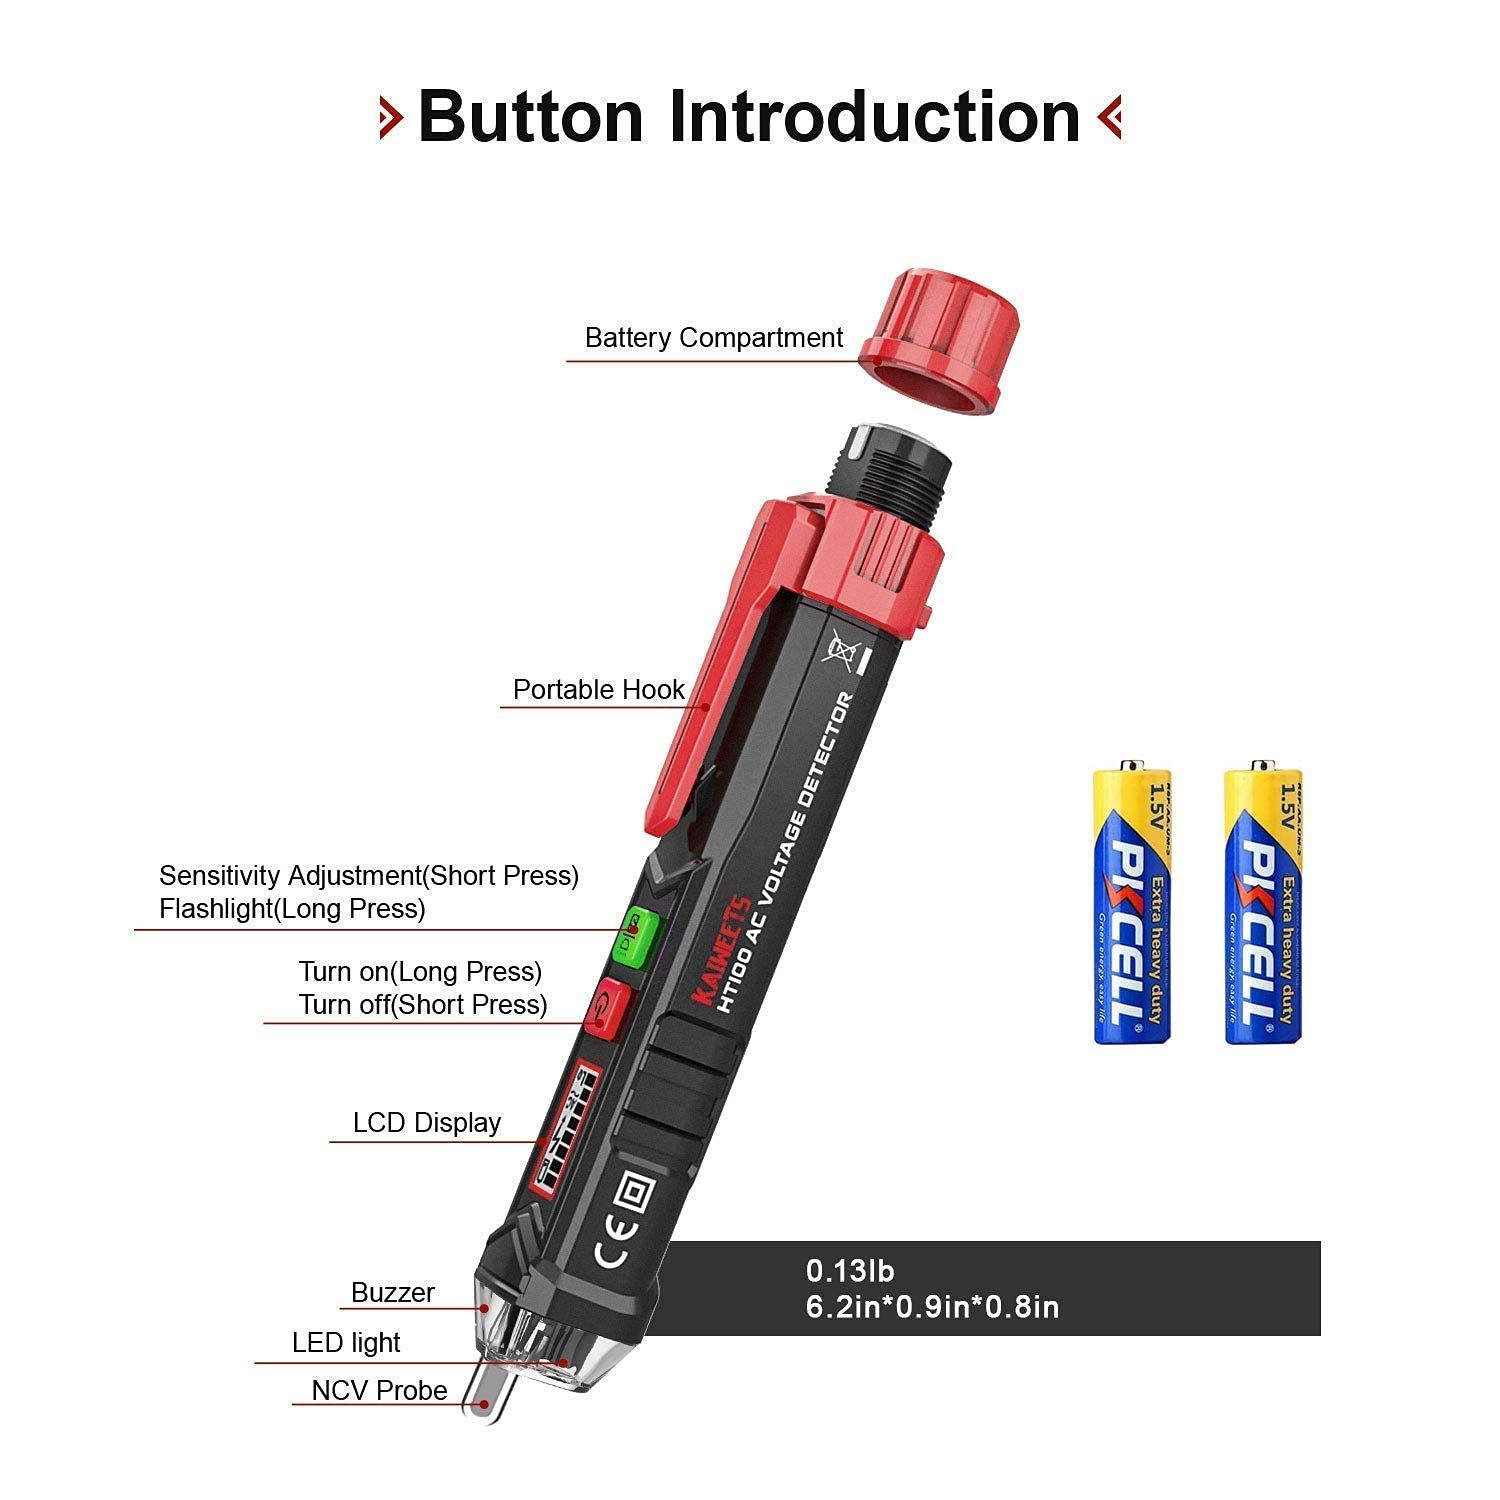 Voltage Tester/Non-Contact Voltage Tester with Dual Range AC 12V-1000V/48V-1000V, Live/Empty Line Tester, Electrical Tester with LCD Display, Buzzer Alarm, Breakpoint Detector